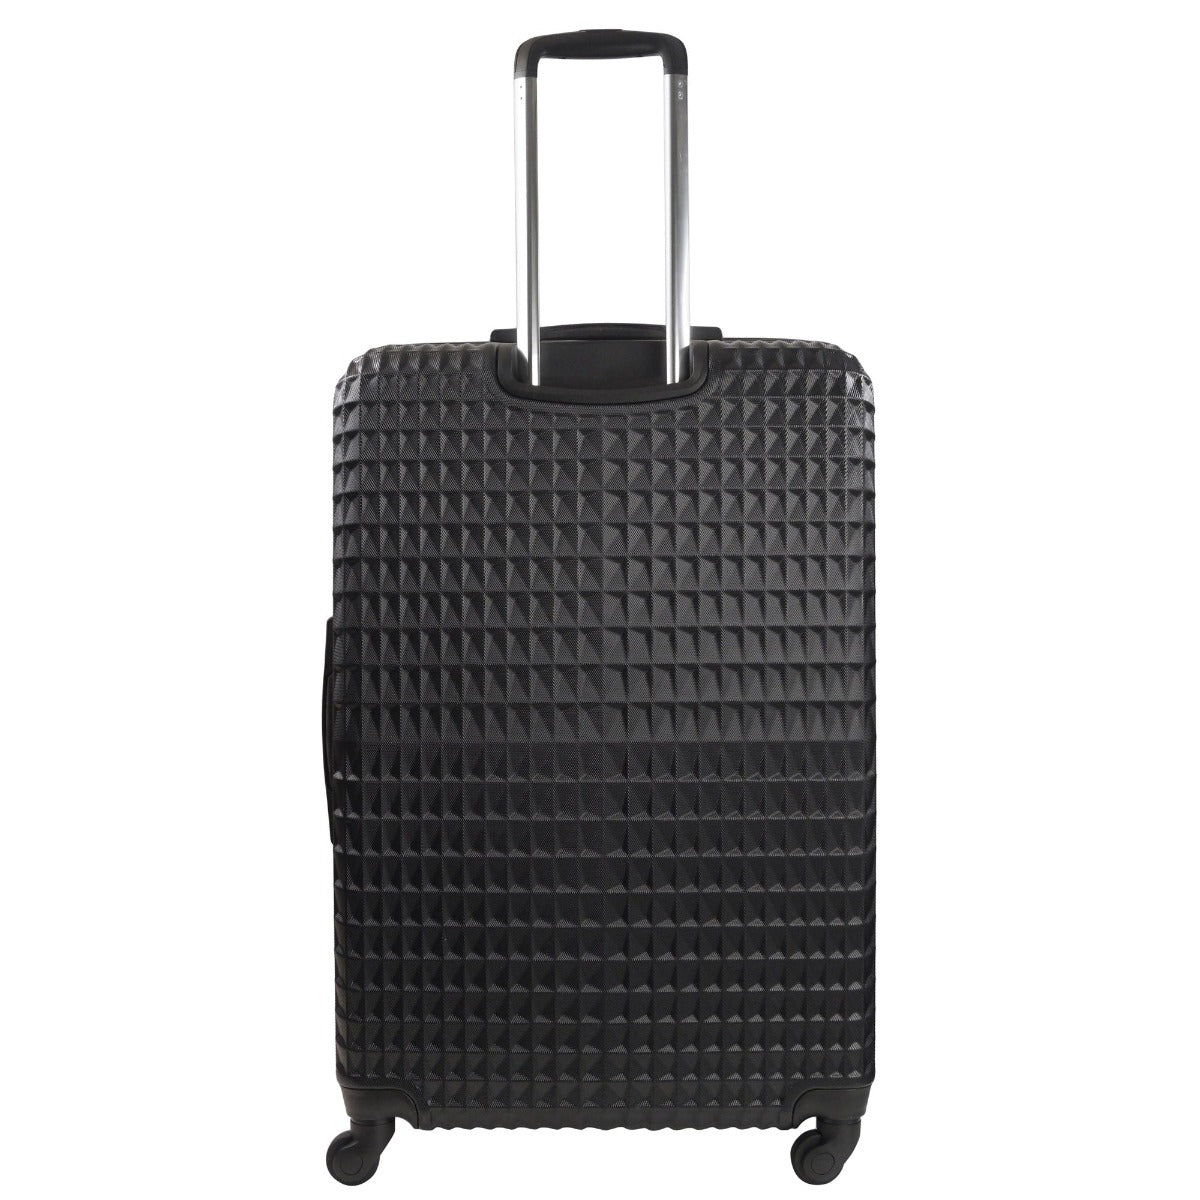 Ful Geo 31 inch hard sided spinner suitcase luggage black large checked bag